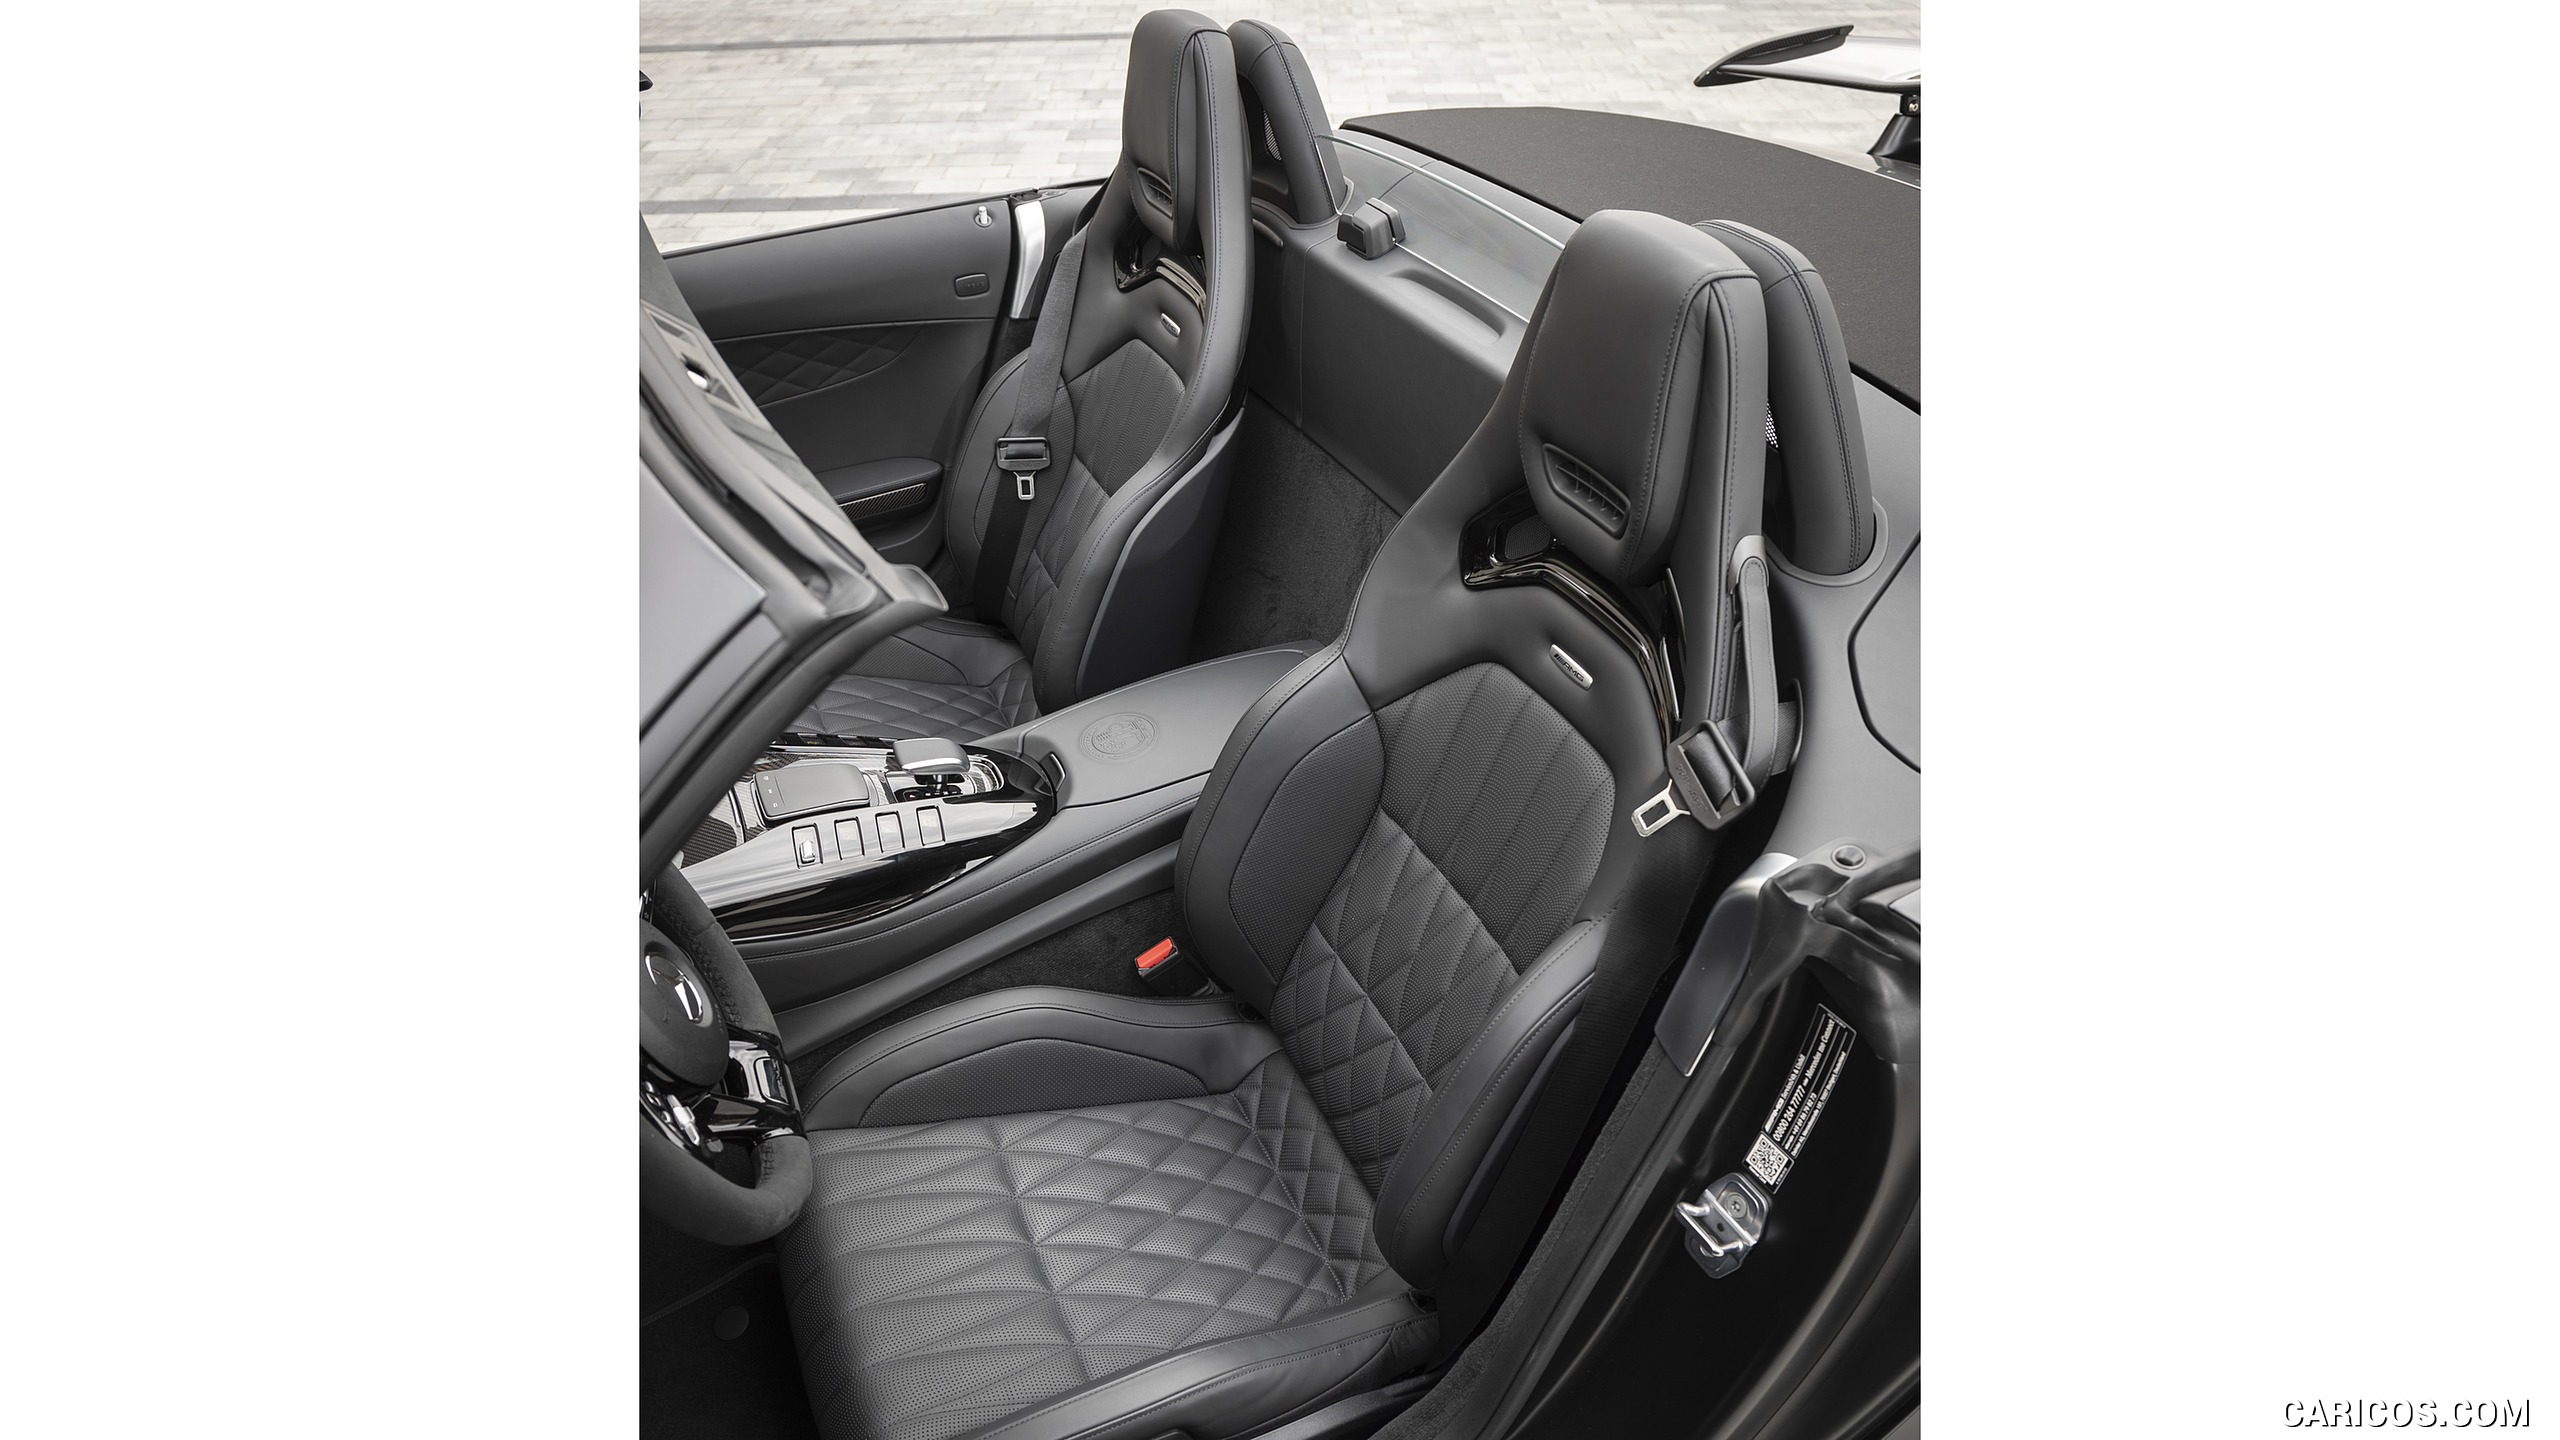 2020 Mercedes-AMG GT R Roadster - Interior, Seats, #42 of 246